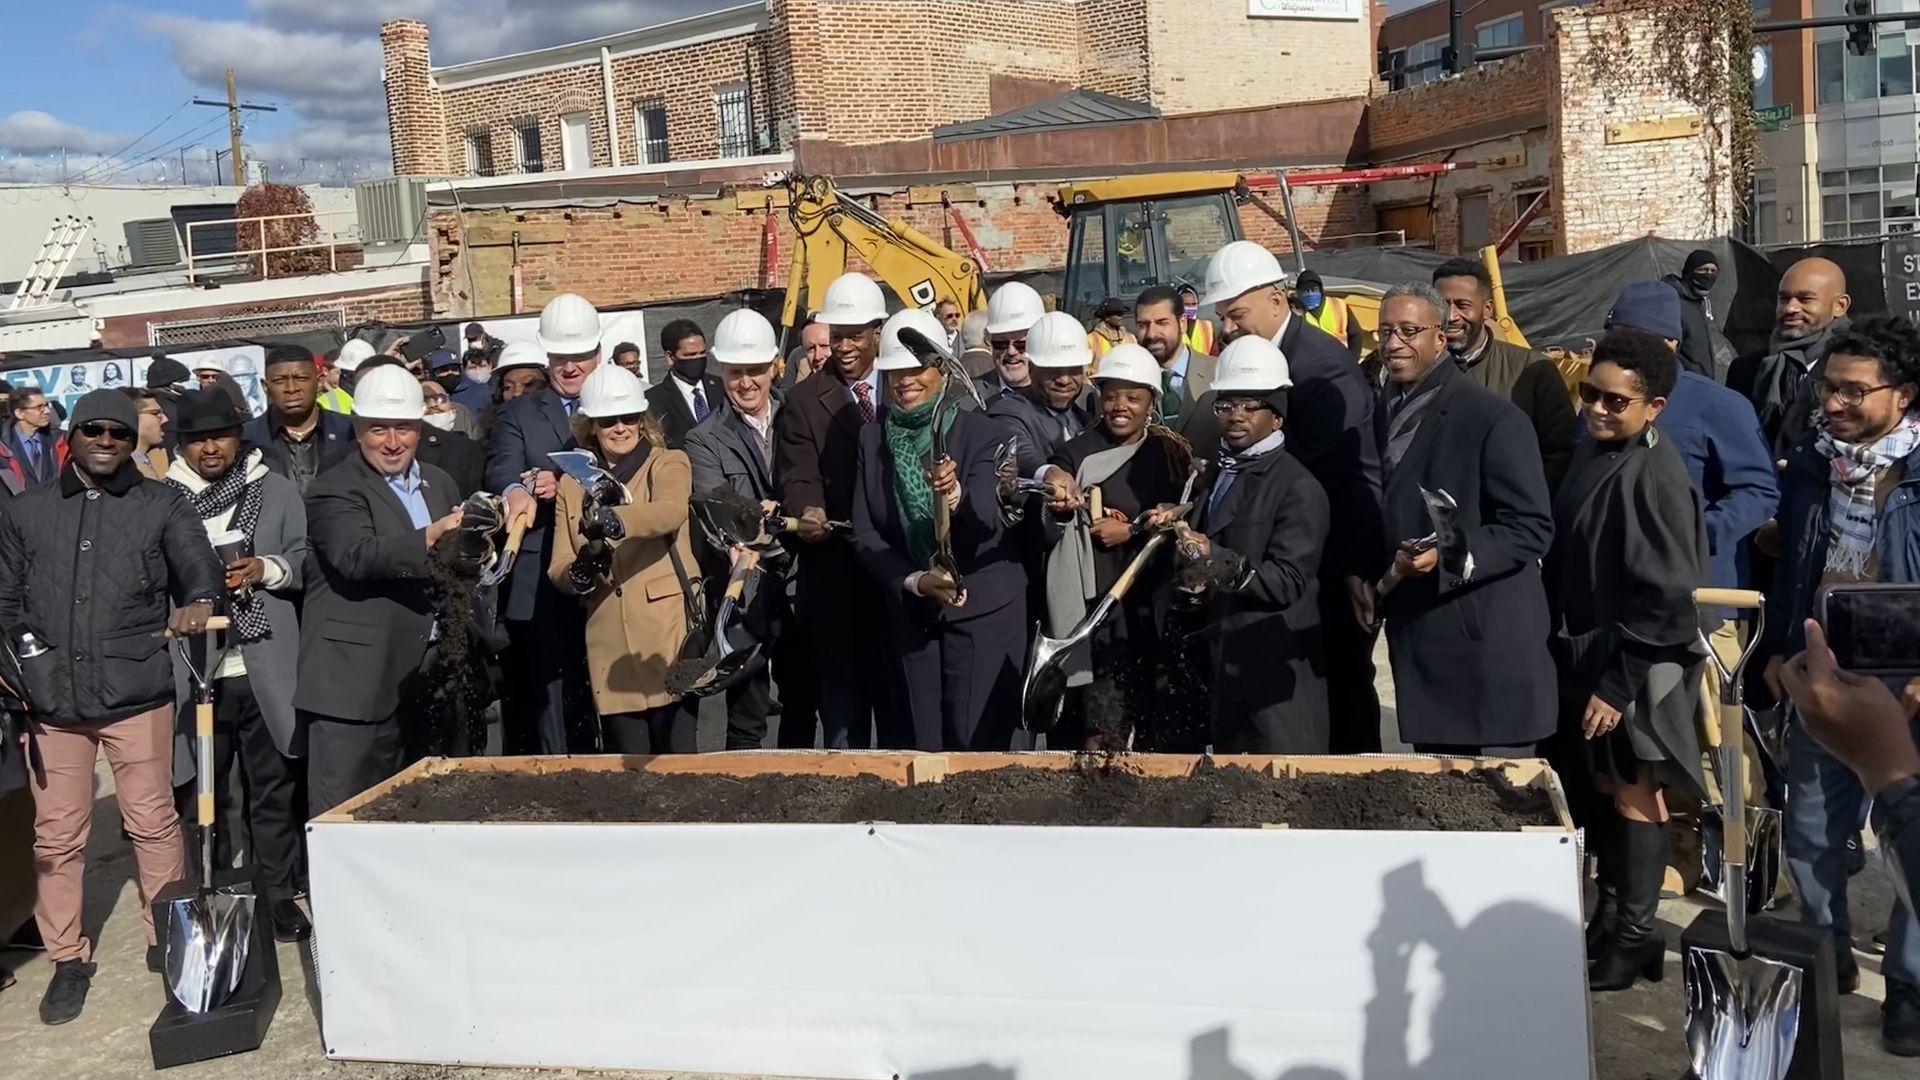 A crowd of D.C. leaders and developers shoveling dirt in a ceremonial groundbreaking.